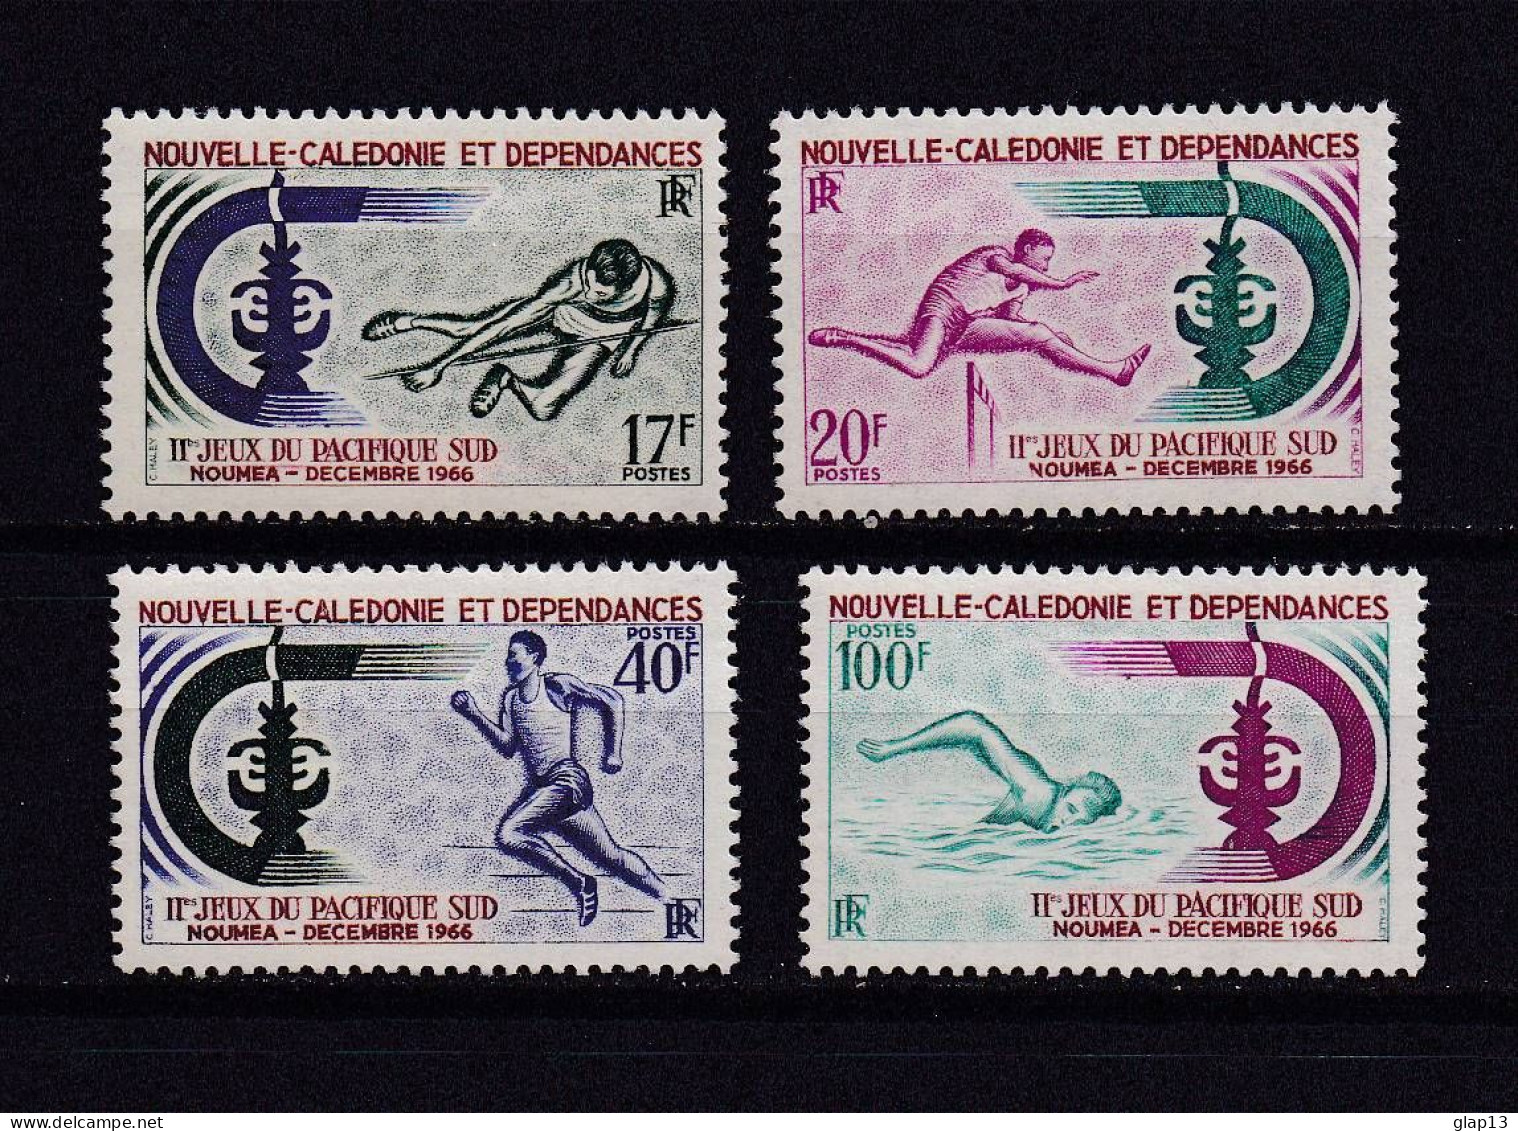 NOUVELLE-CALEDONIE 1966 TIMBRE N°332/35 NEUF AVEC CHARNIERE SPORTS - Ungebraucht